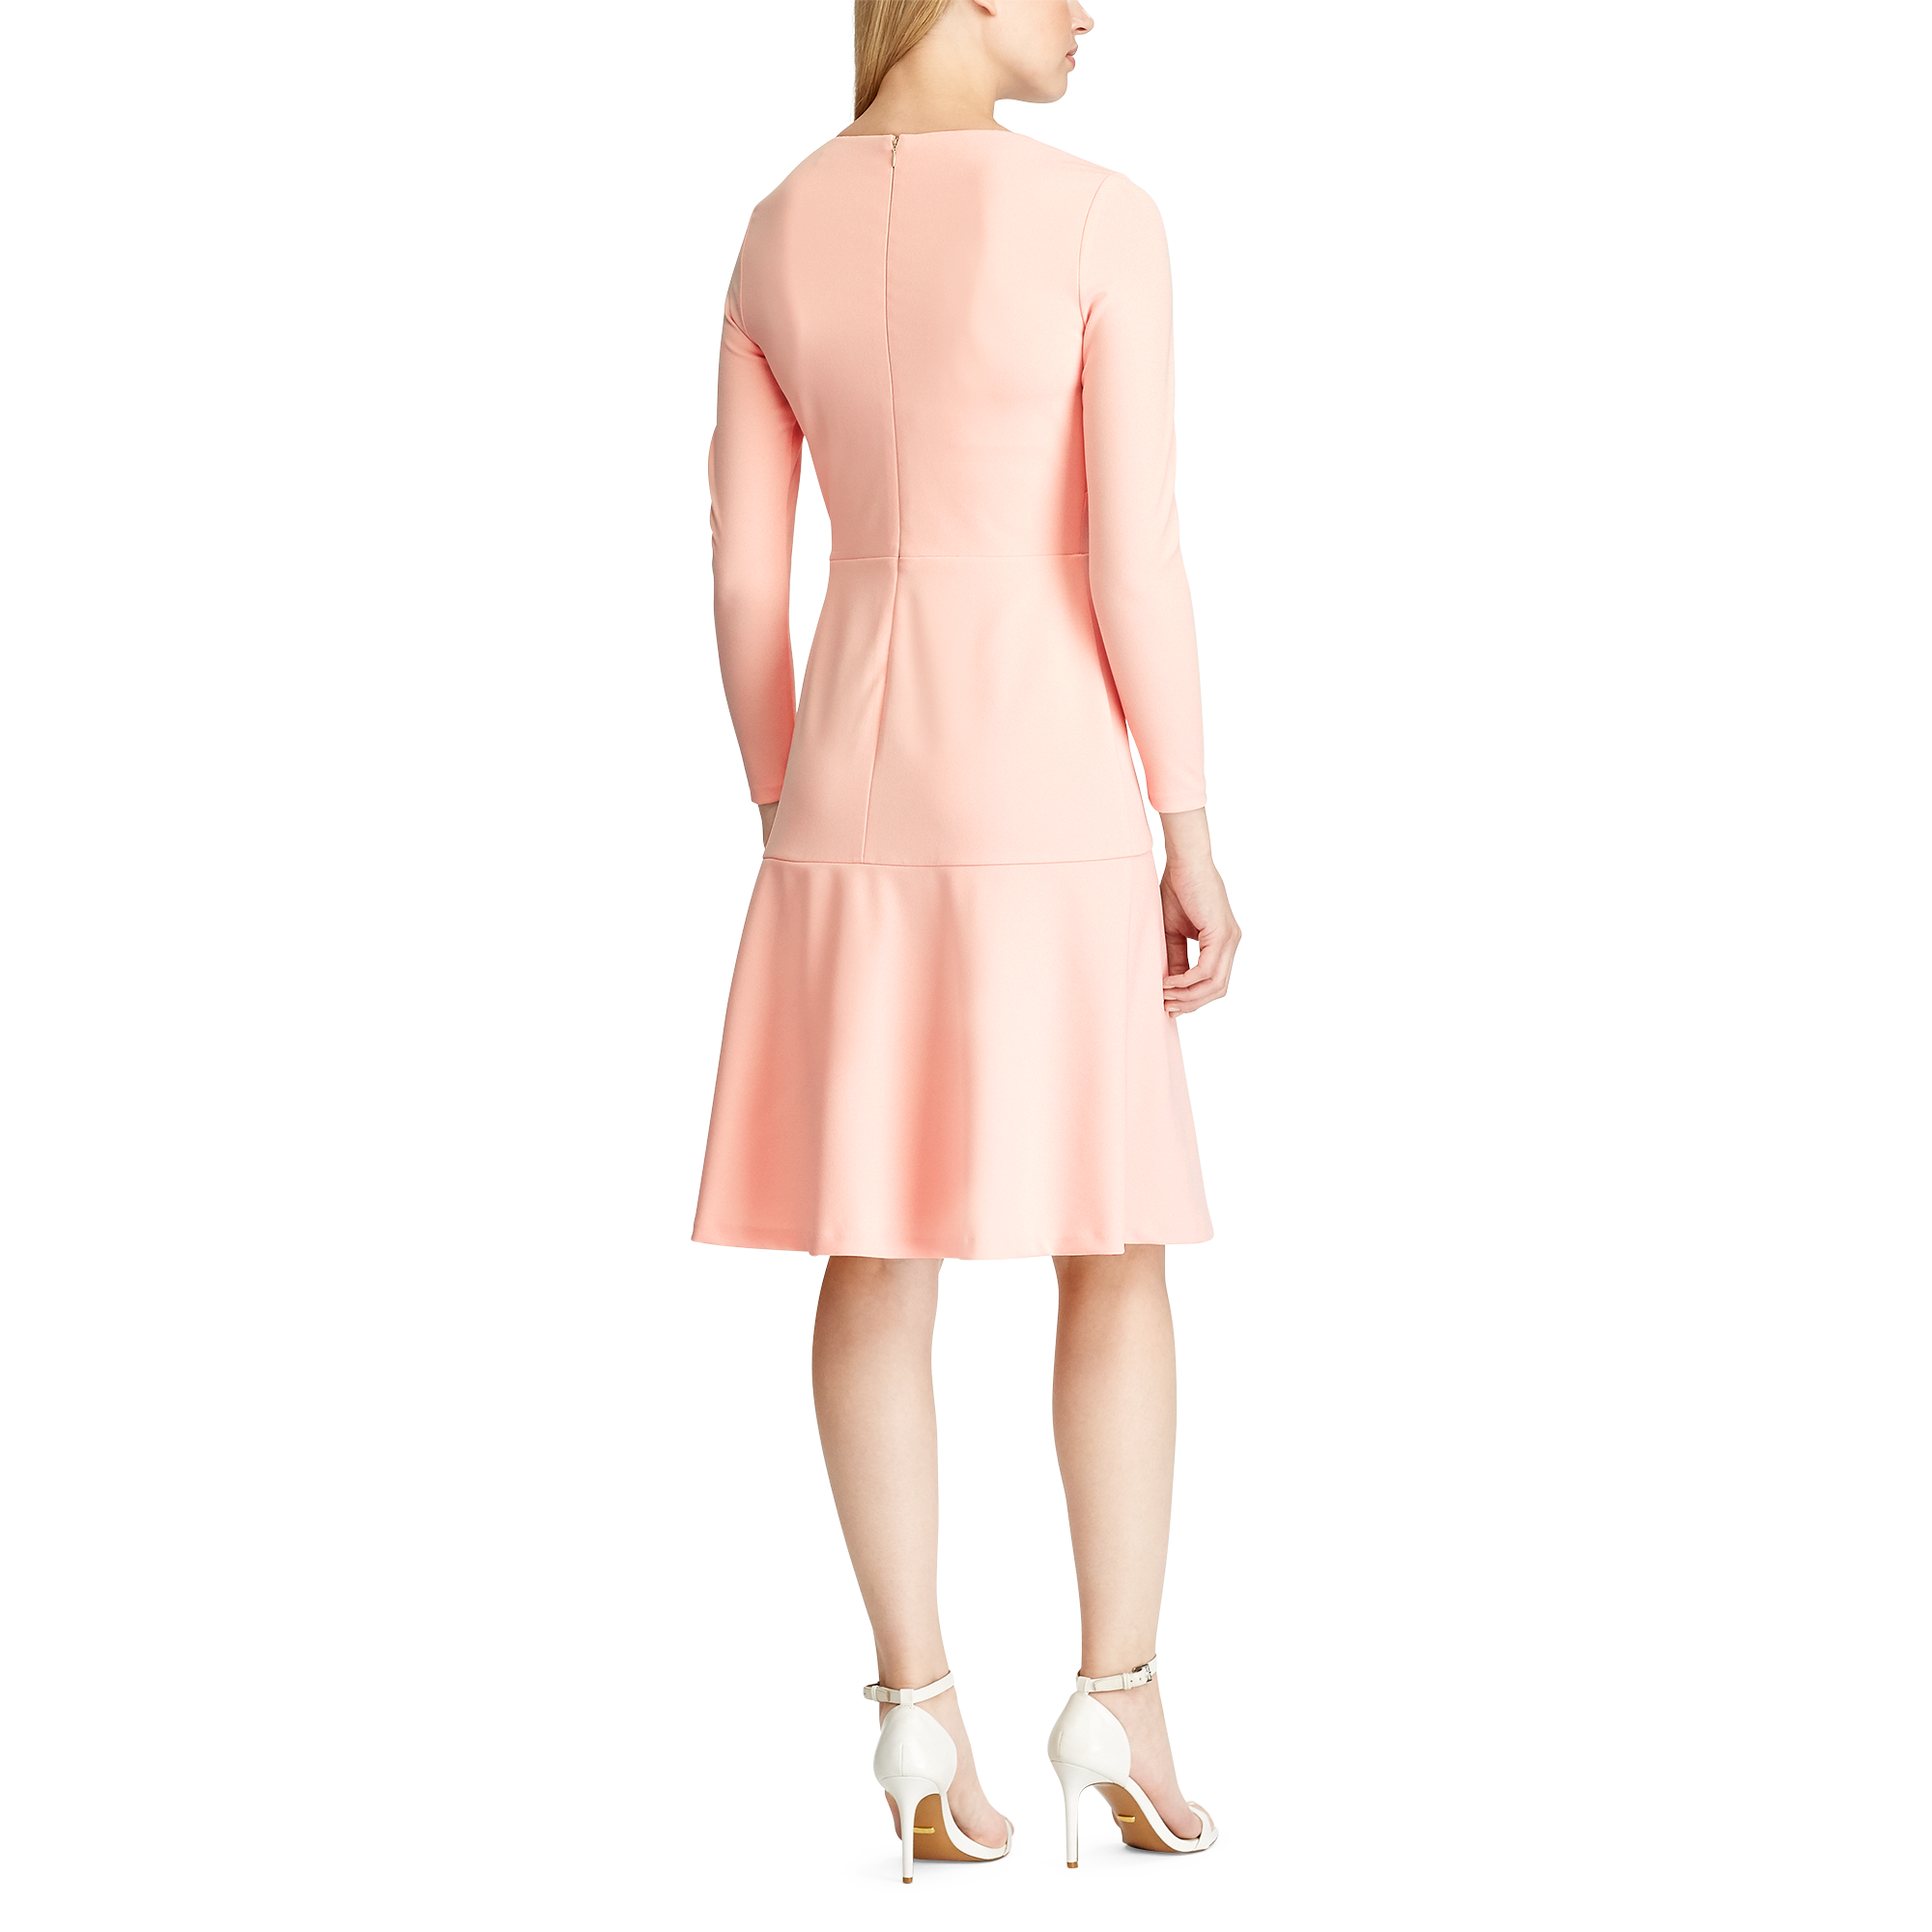 Ralph Lauren Crepe Fit-and-Flare Dress. 4